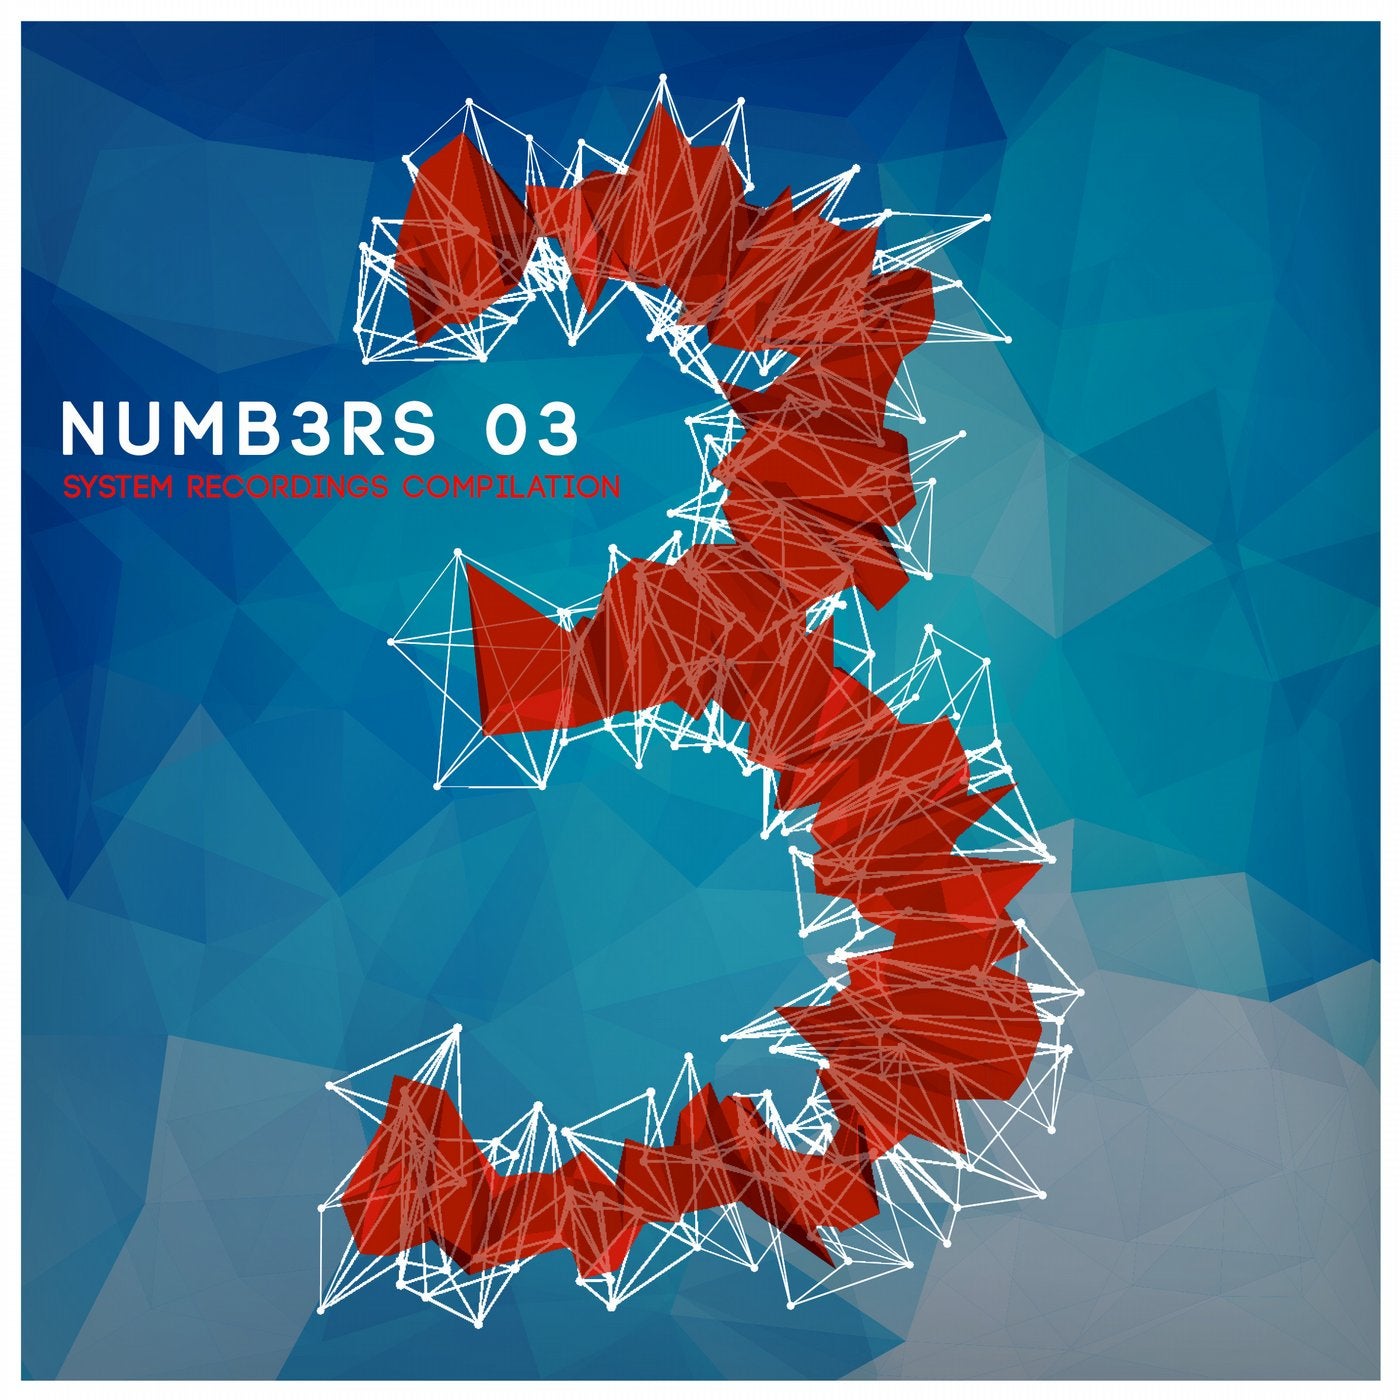 NUMB3RS 03 - system recordings compilation